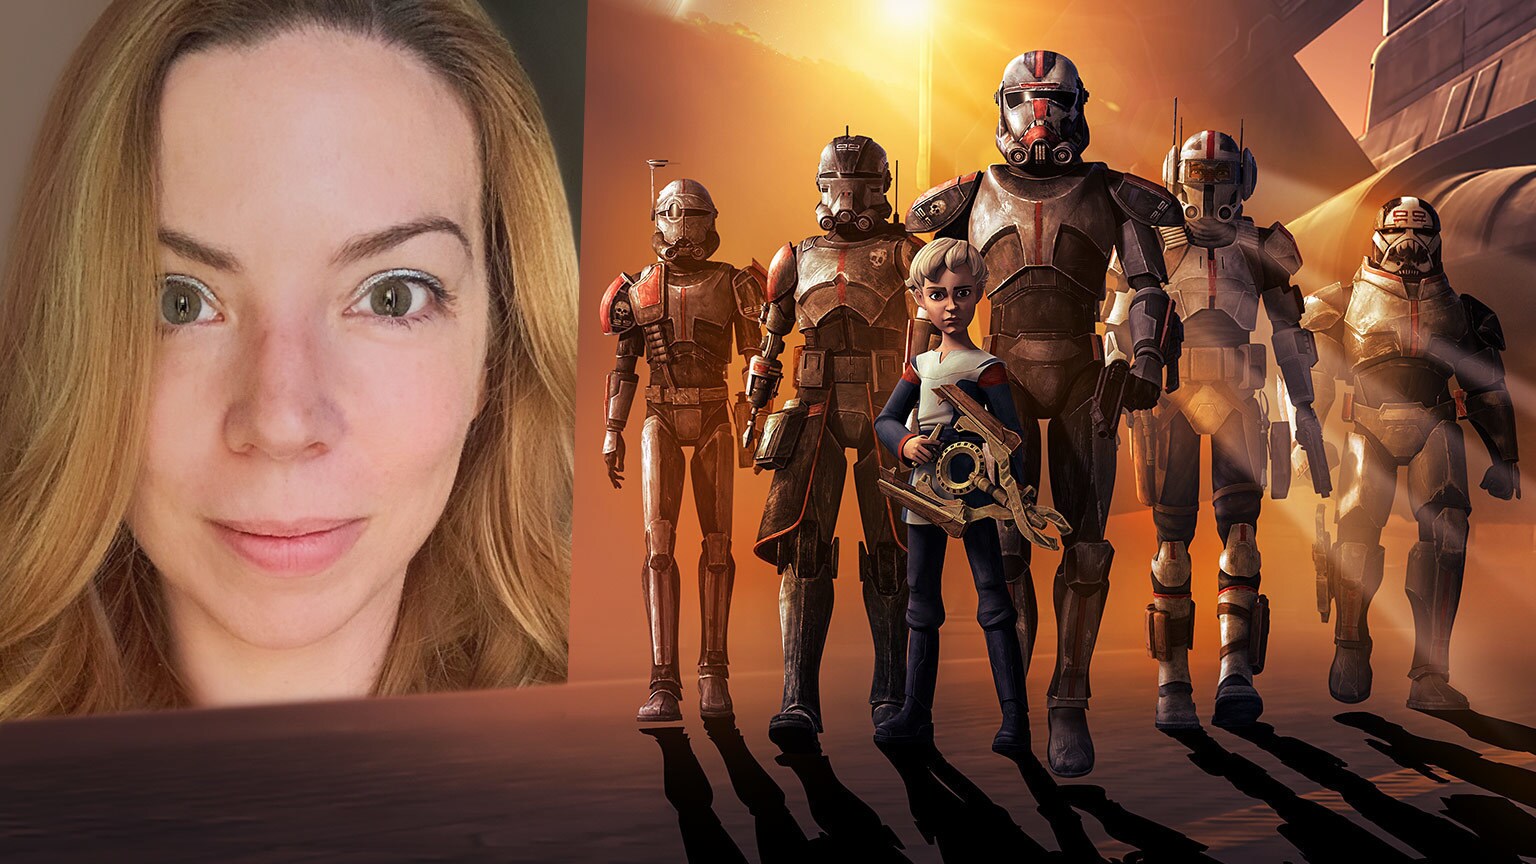 “How Do You Challenge a Super Soldier?”: Jennifer Corbett on Helping the Clones in Star Wars: The Bad Batch Find Their Way